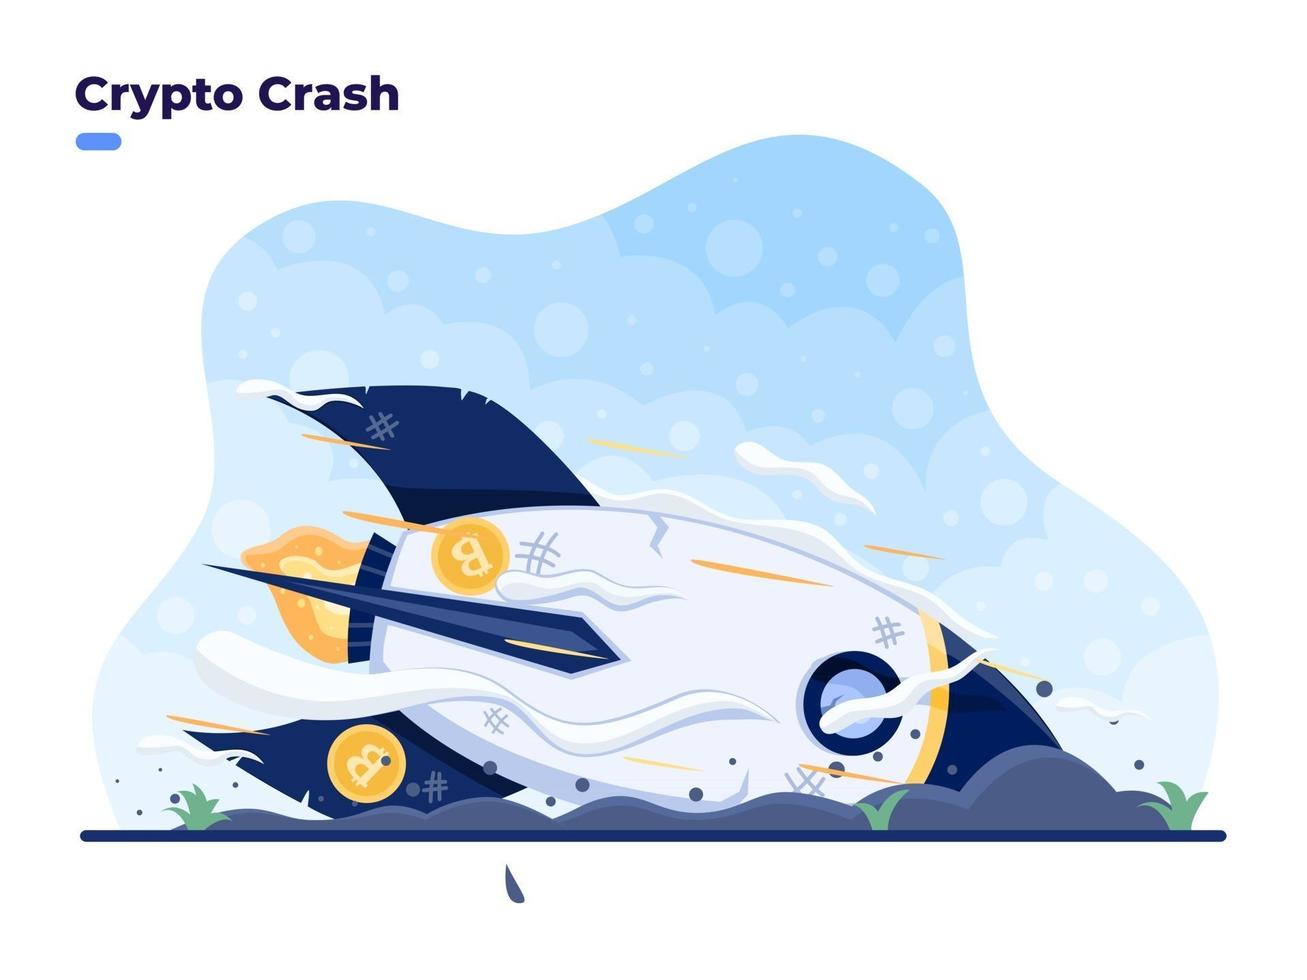 Crypto Crash vector flat illustration concept with bitcoin rocket crashing to ground. Bitcoin market crash or depreciation. Price Collapse of Cryptocurrency. Huge loss at crypto investment.